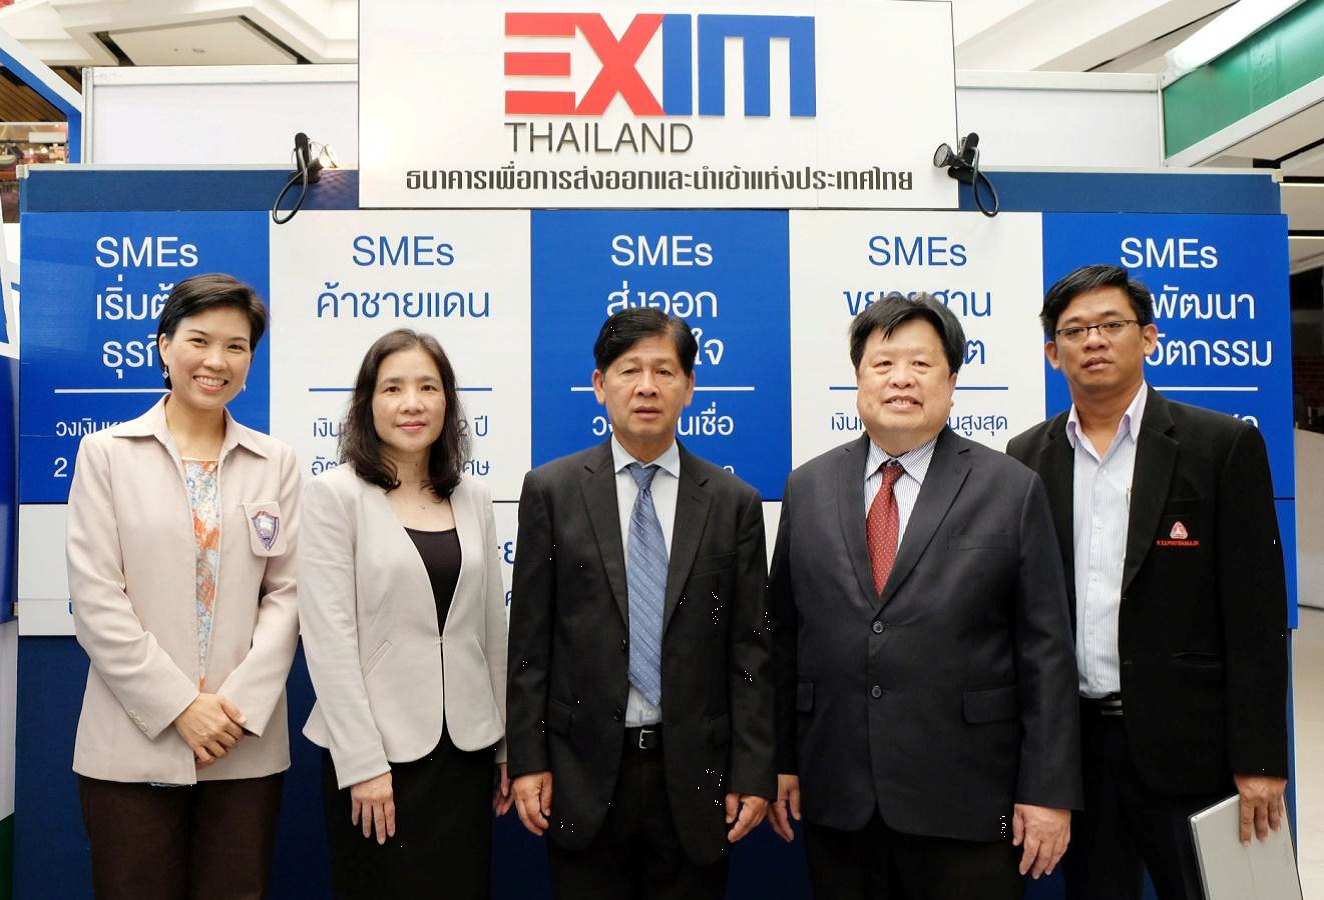 EXIM Thailand Opens Booth at Thailand Smart Money in Phitsanulok